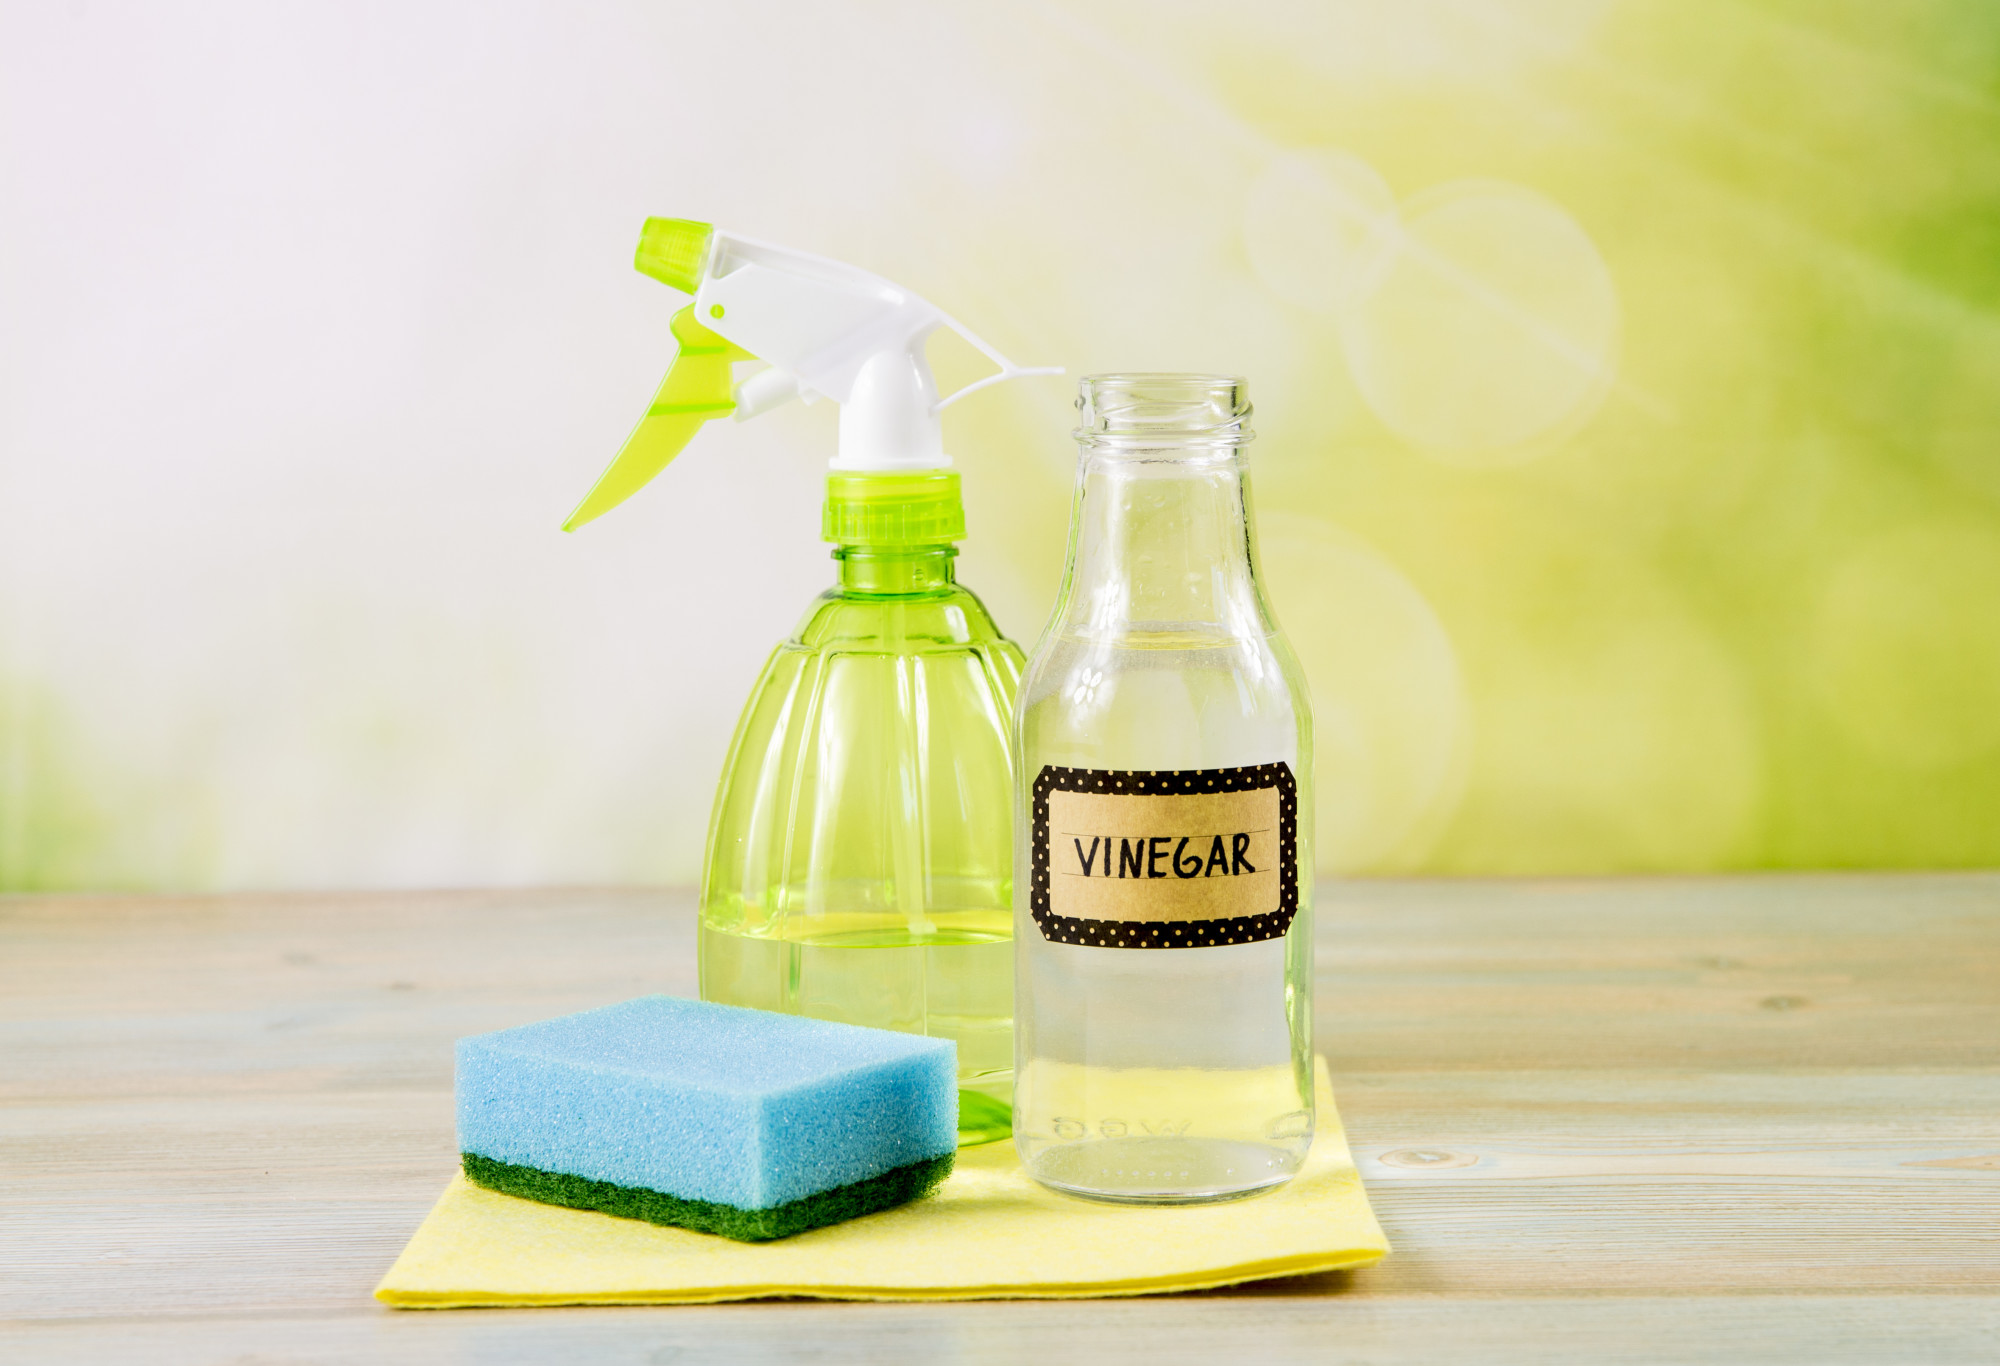 Are you trying to get rid of chemicals in your cleaning routine? Switch to a real eco-friendly cleaning solution with these helpful tips!